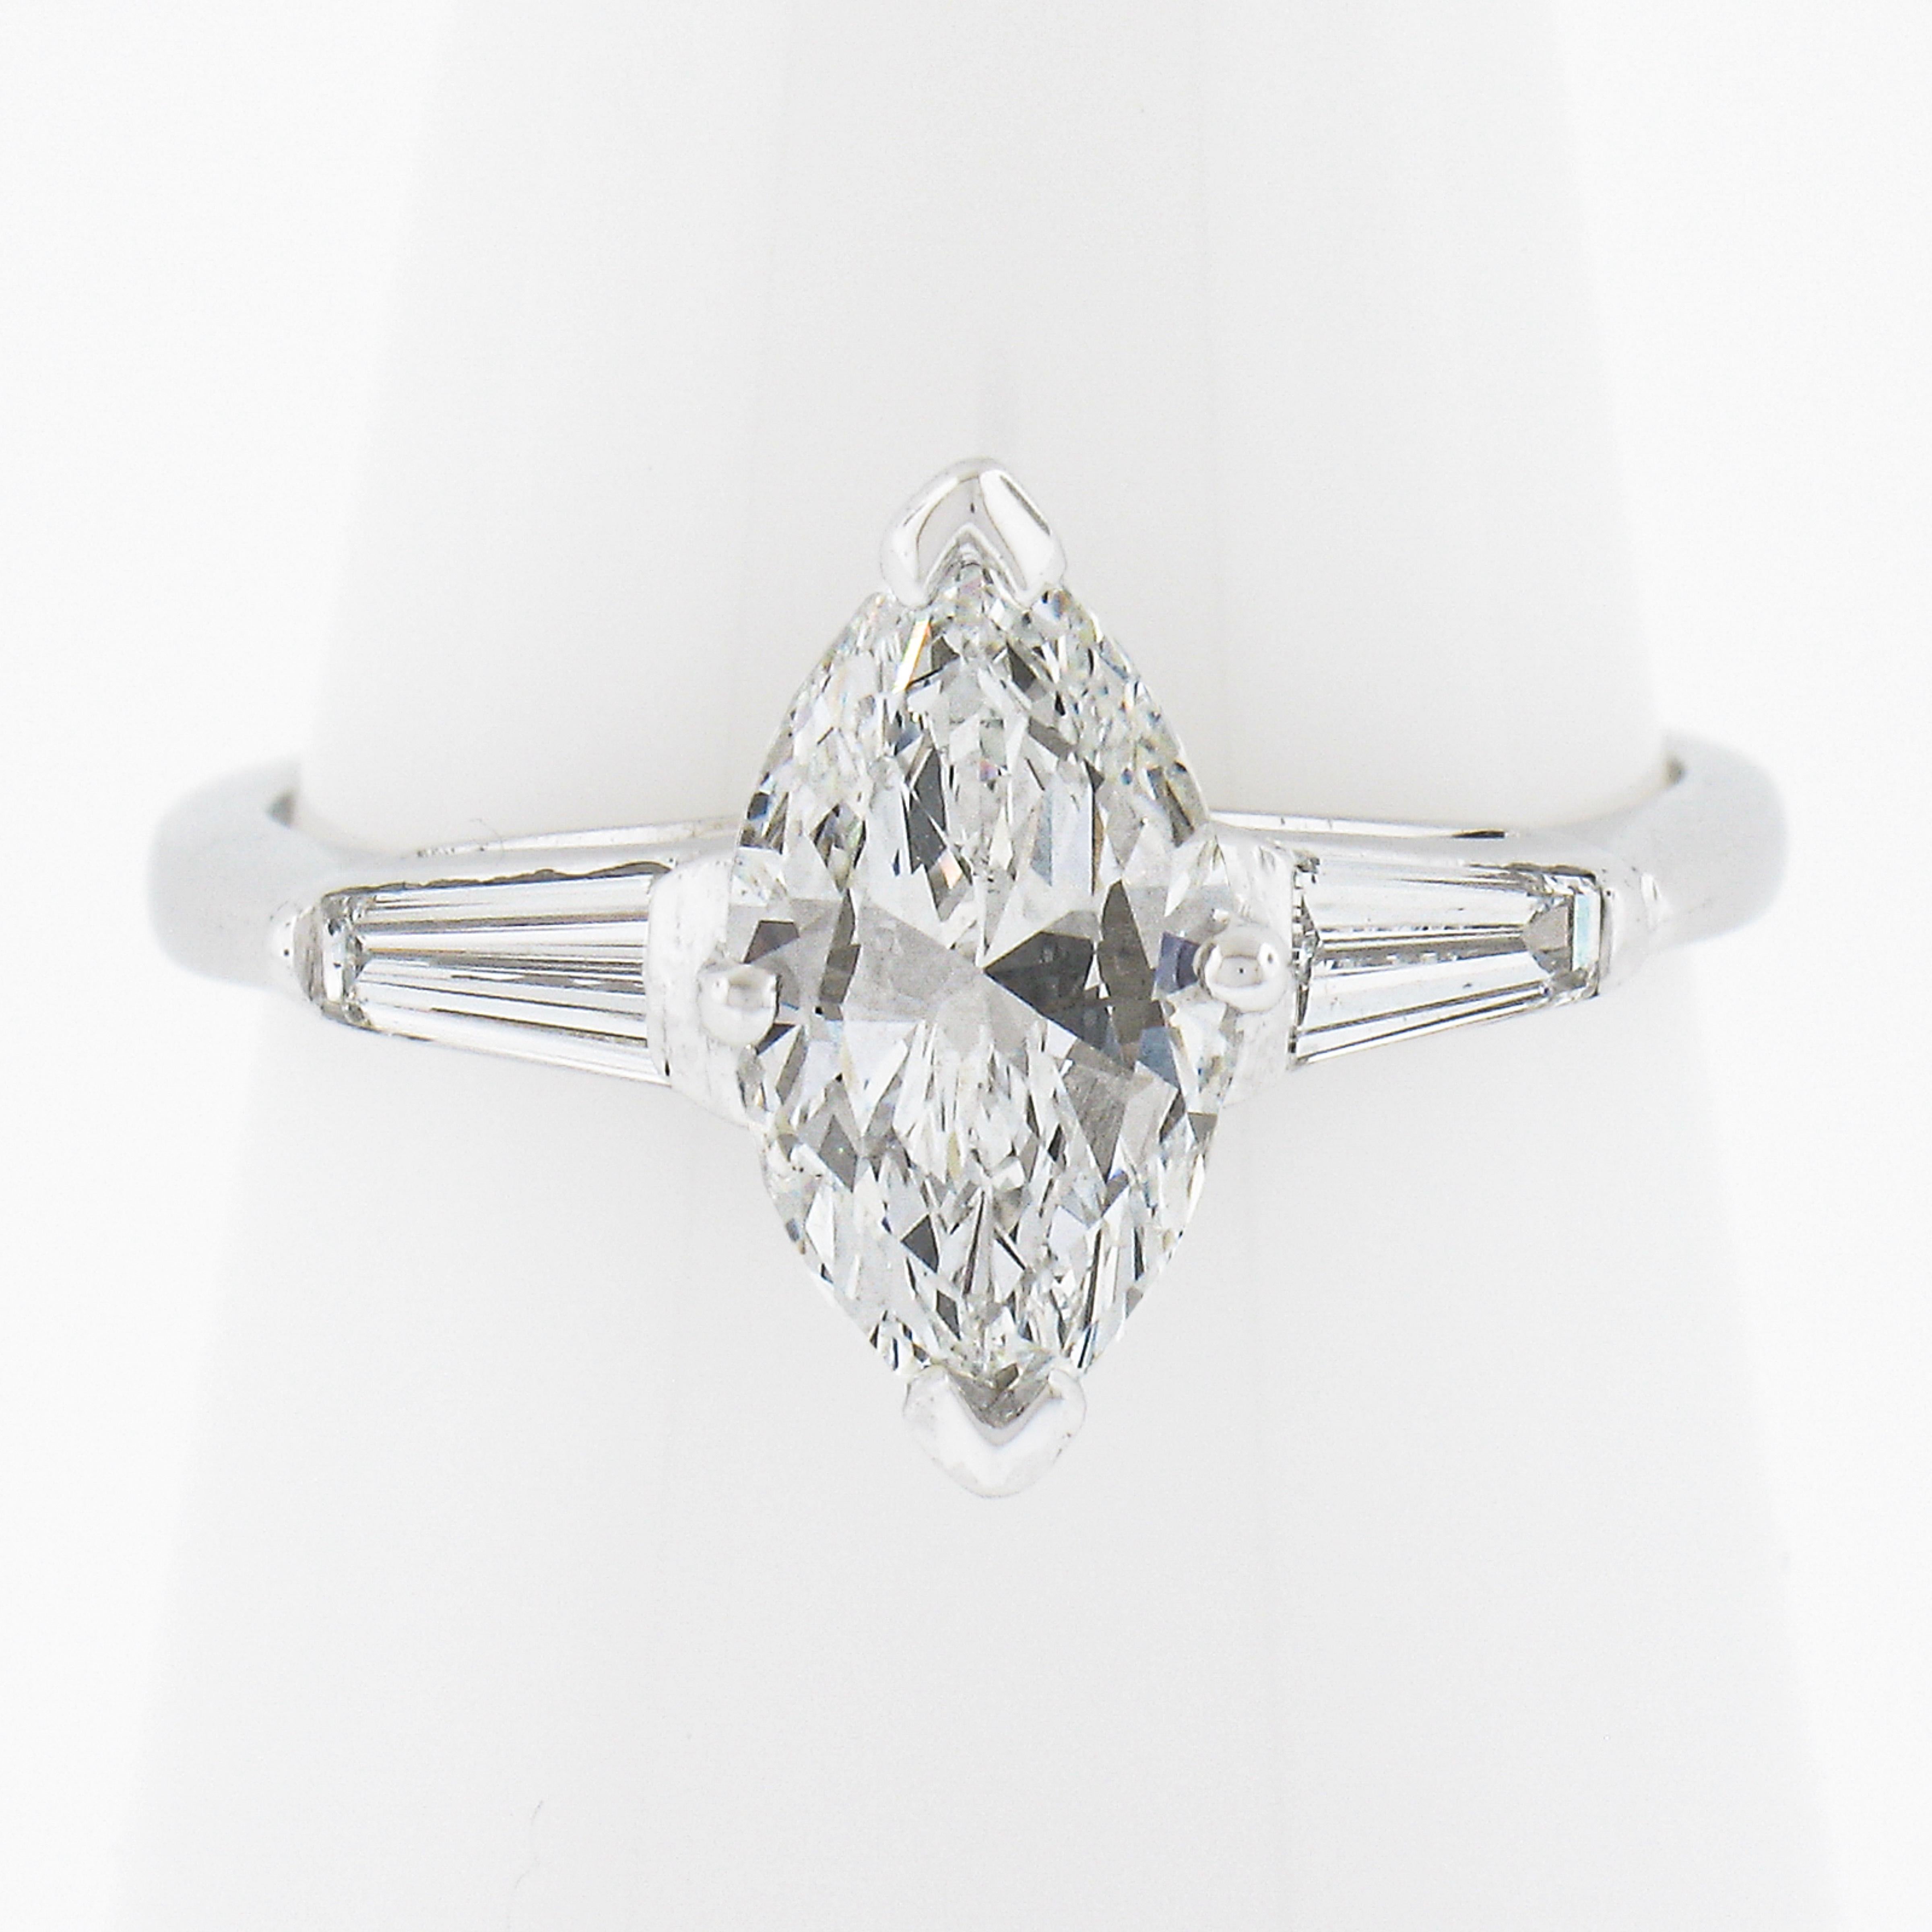 --Stone(s):--
(1) Natural Genuine Diamond - Marquise Cut - Prong Set - F Color - VS2 Clarity - 1.32ct (exact - certified)
** See Certification Details Below for Complete Info **
(2) Natural Genuine Diamonds - Tapered Baguette Cut - Channel Set - F/G